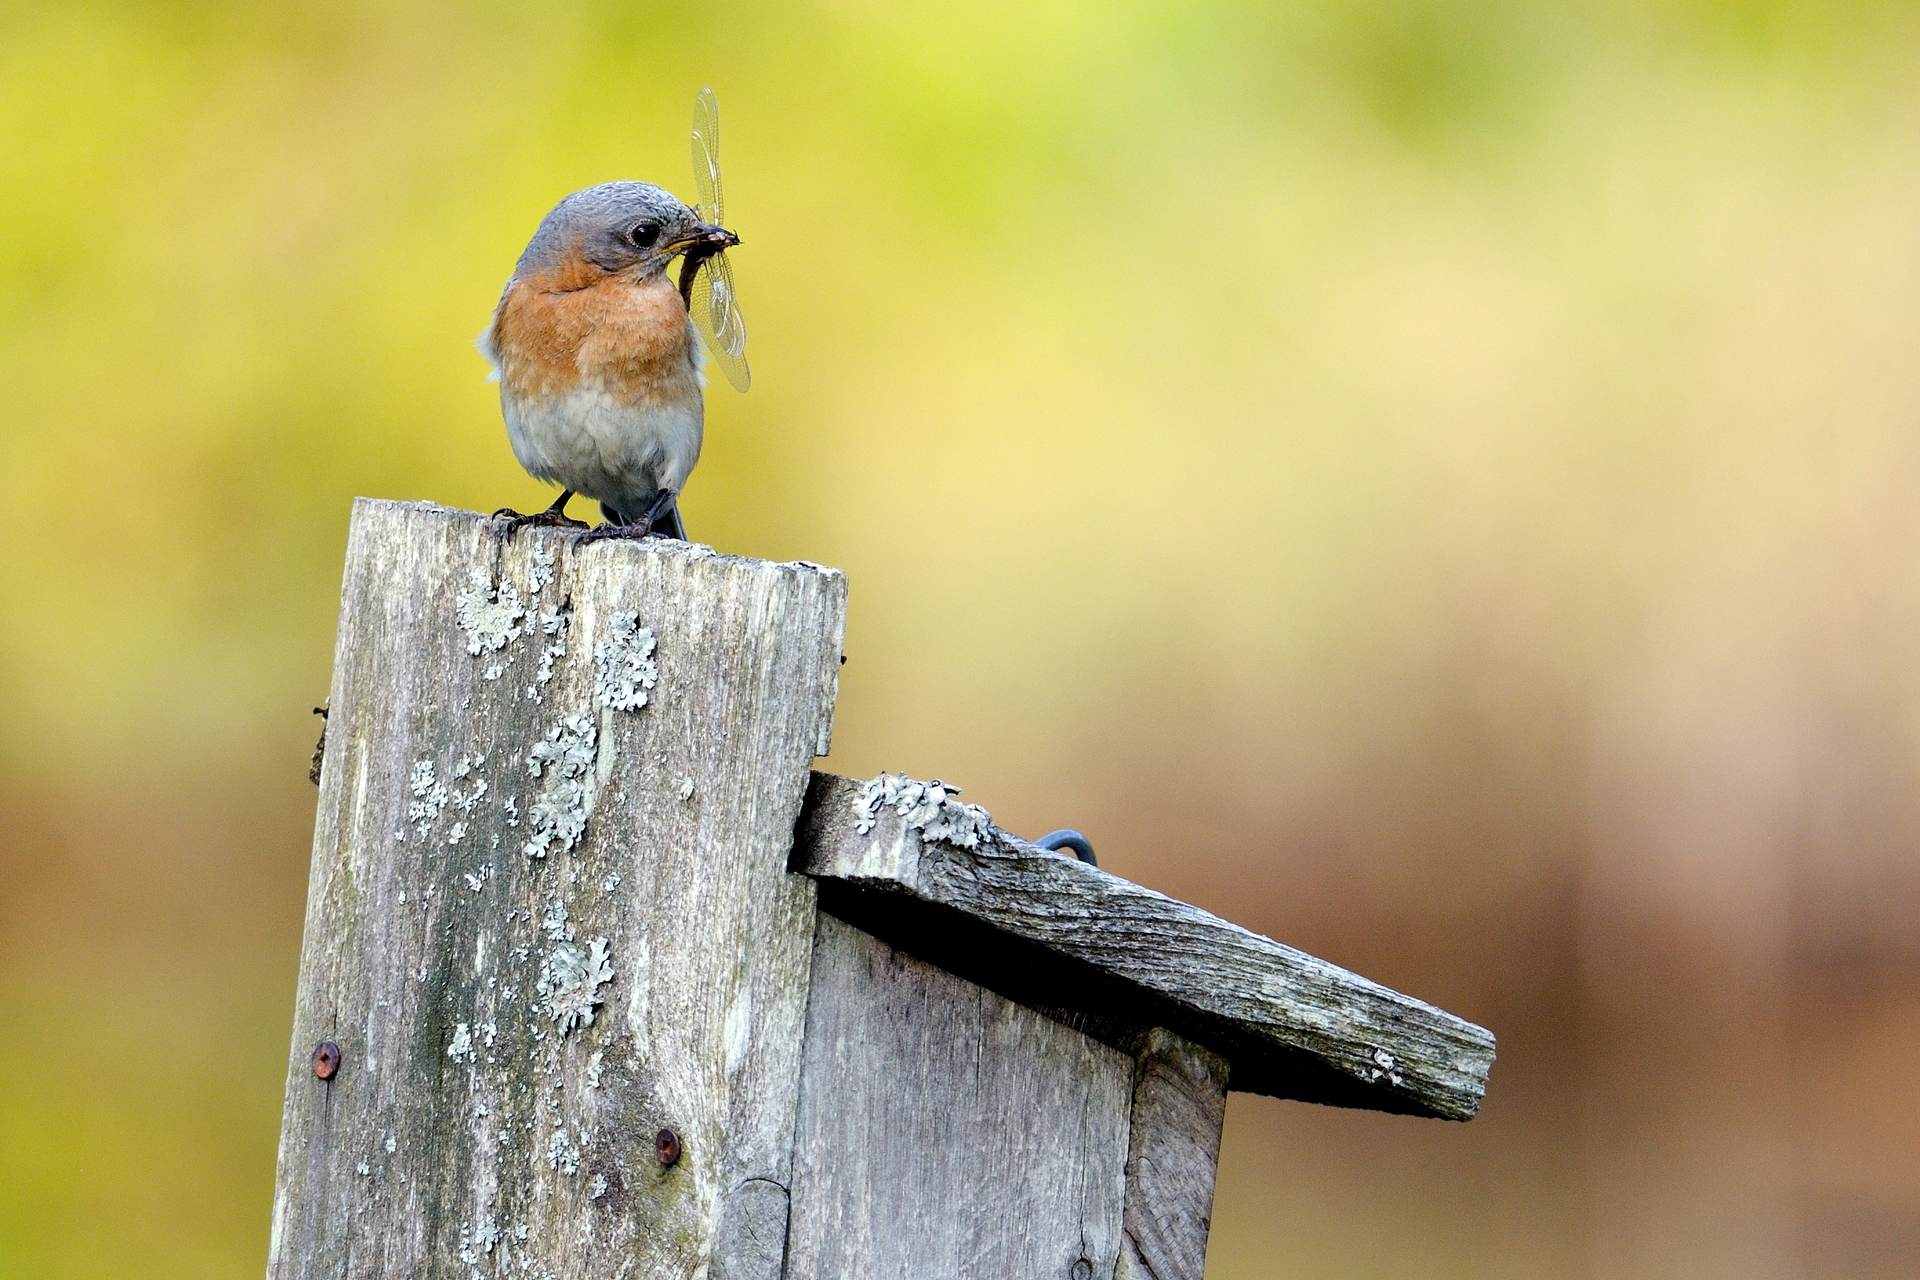 Eastern Bluebird on top of a wooden birdbox with a dragonfly in its beak.